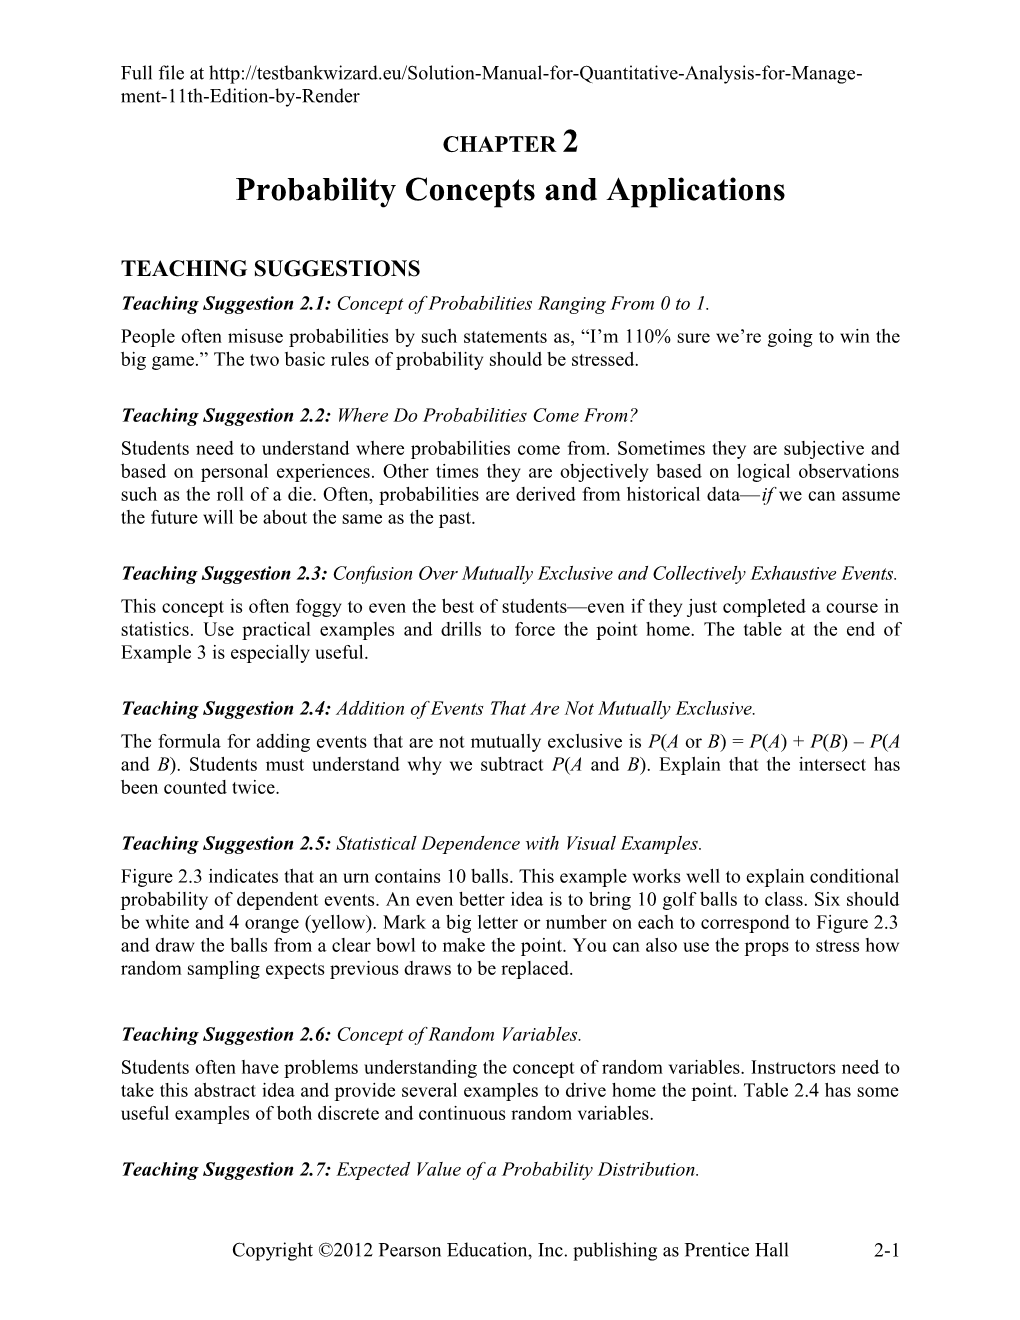 Probability Concepts and Applications